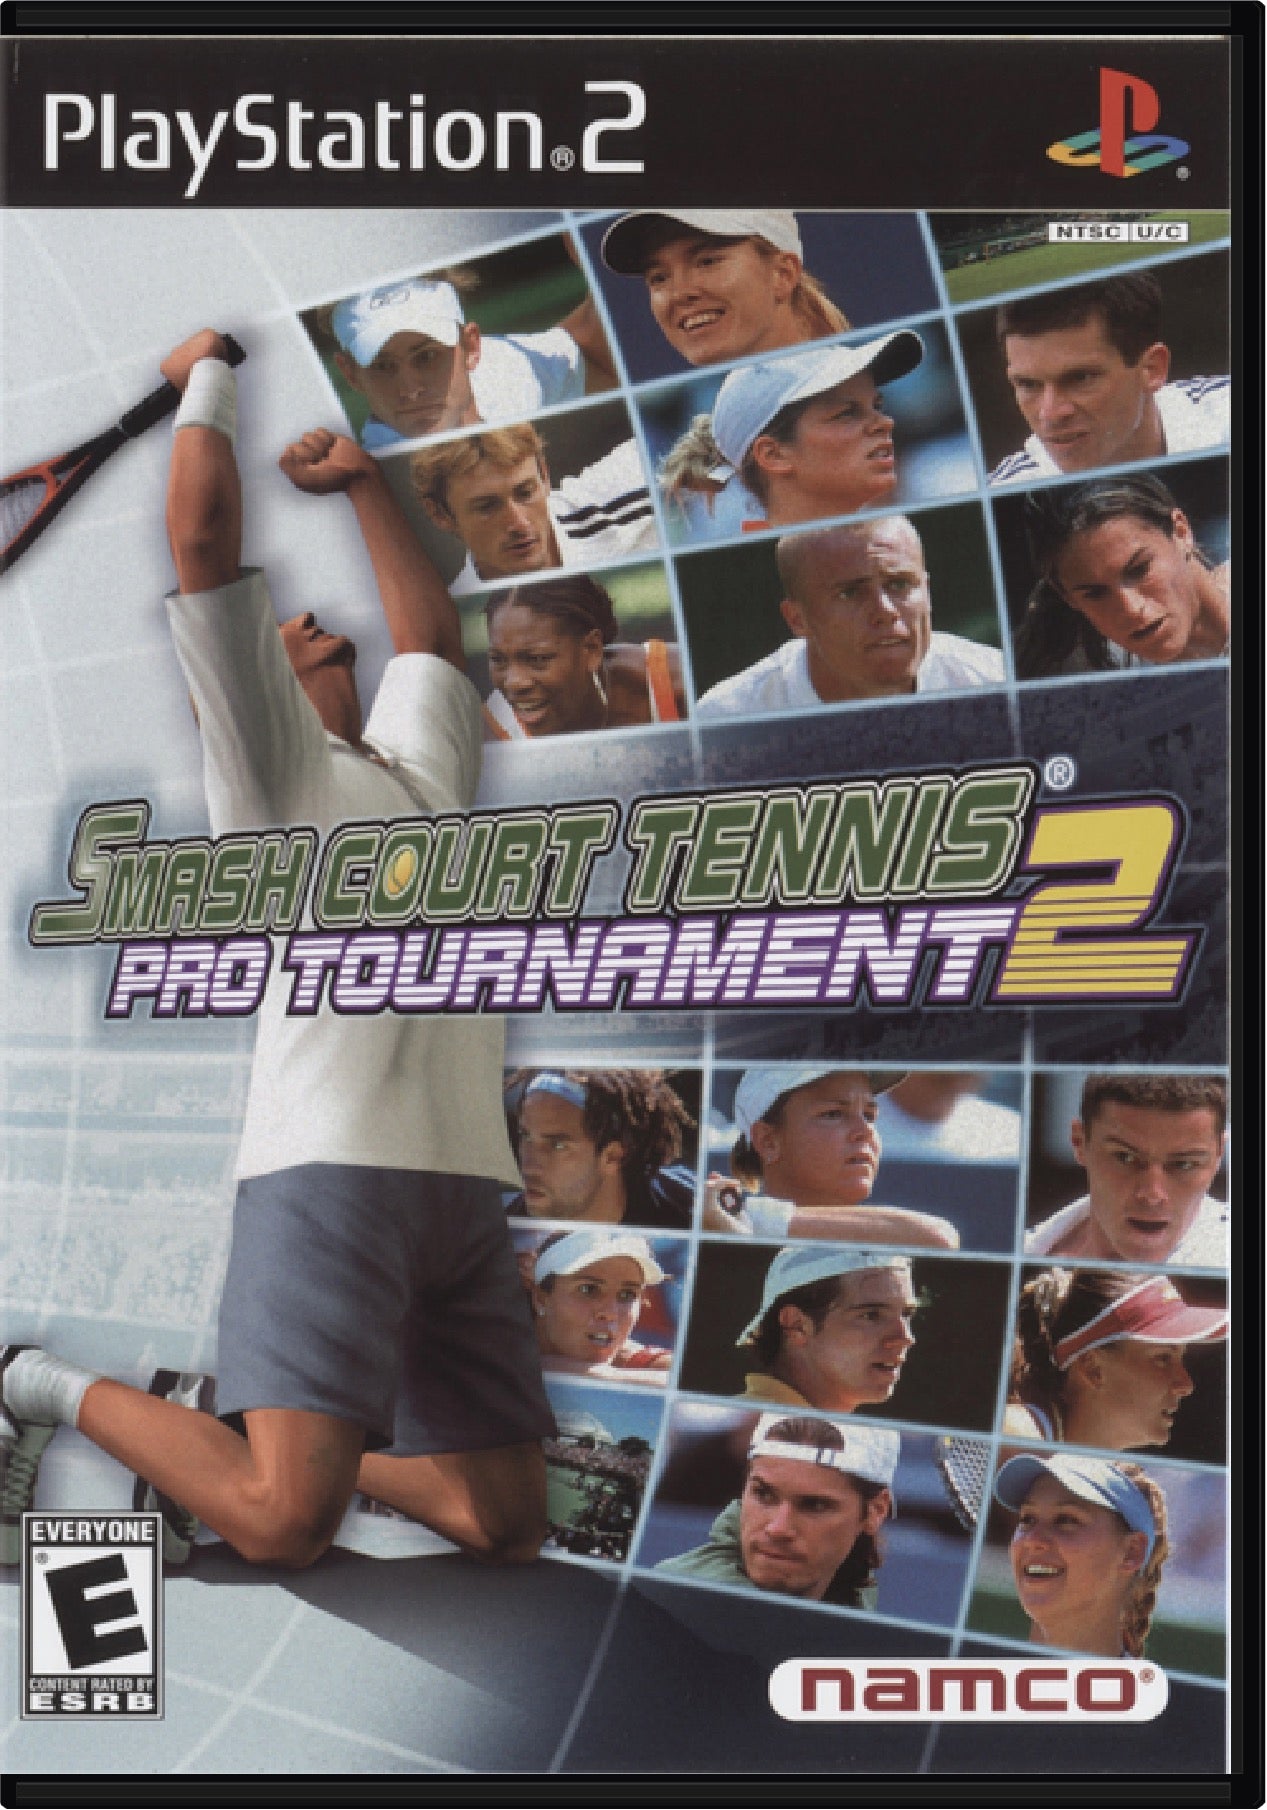 Smash Court Tennis Pro Tournament 2 Cover Art and Product Photo